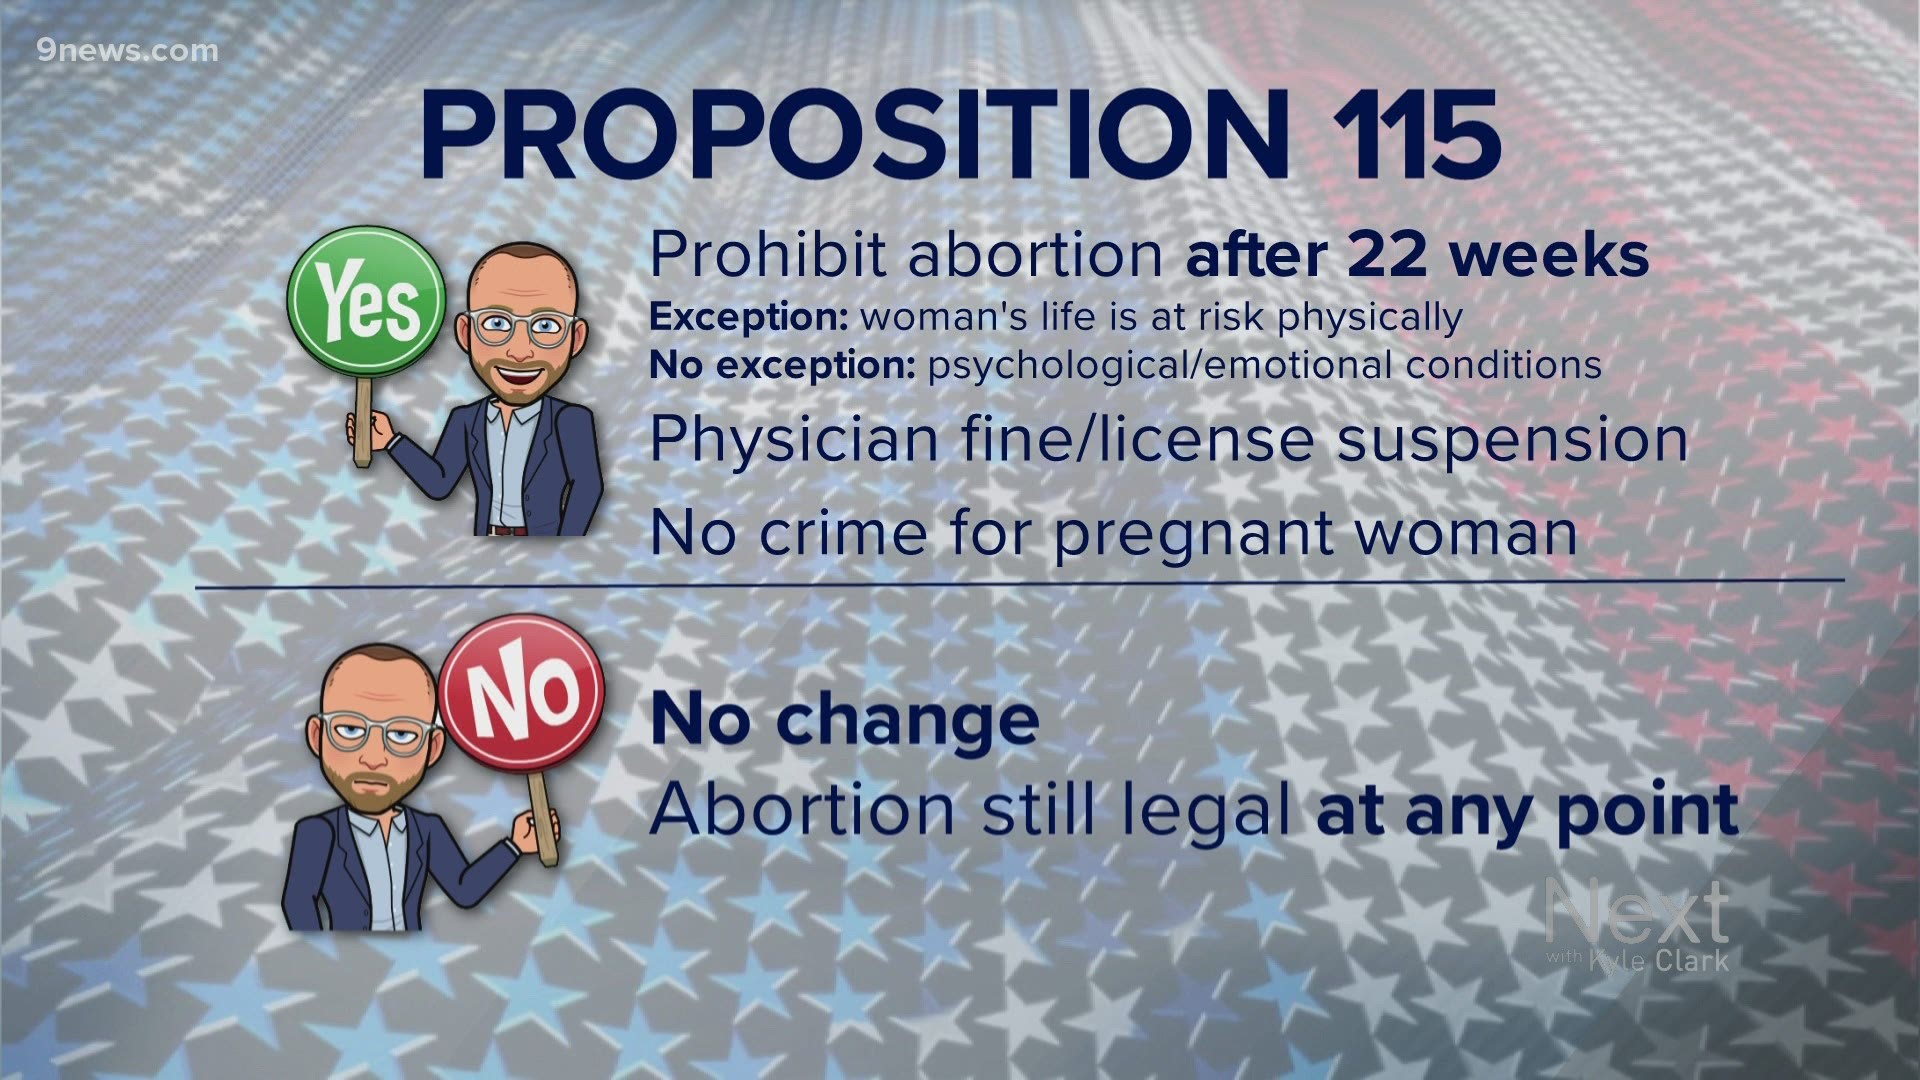 This is part of a series of statewide ballot reviews called "We Don't Have To Agree, But Let's Just Vote." Today we look at Prop. 115 (abortion rule).